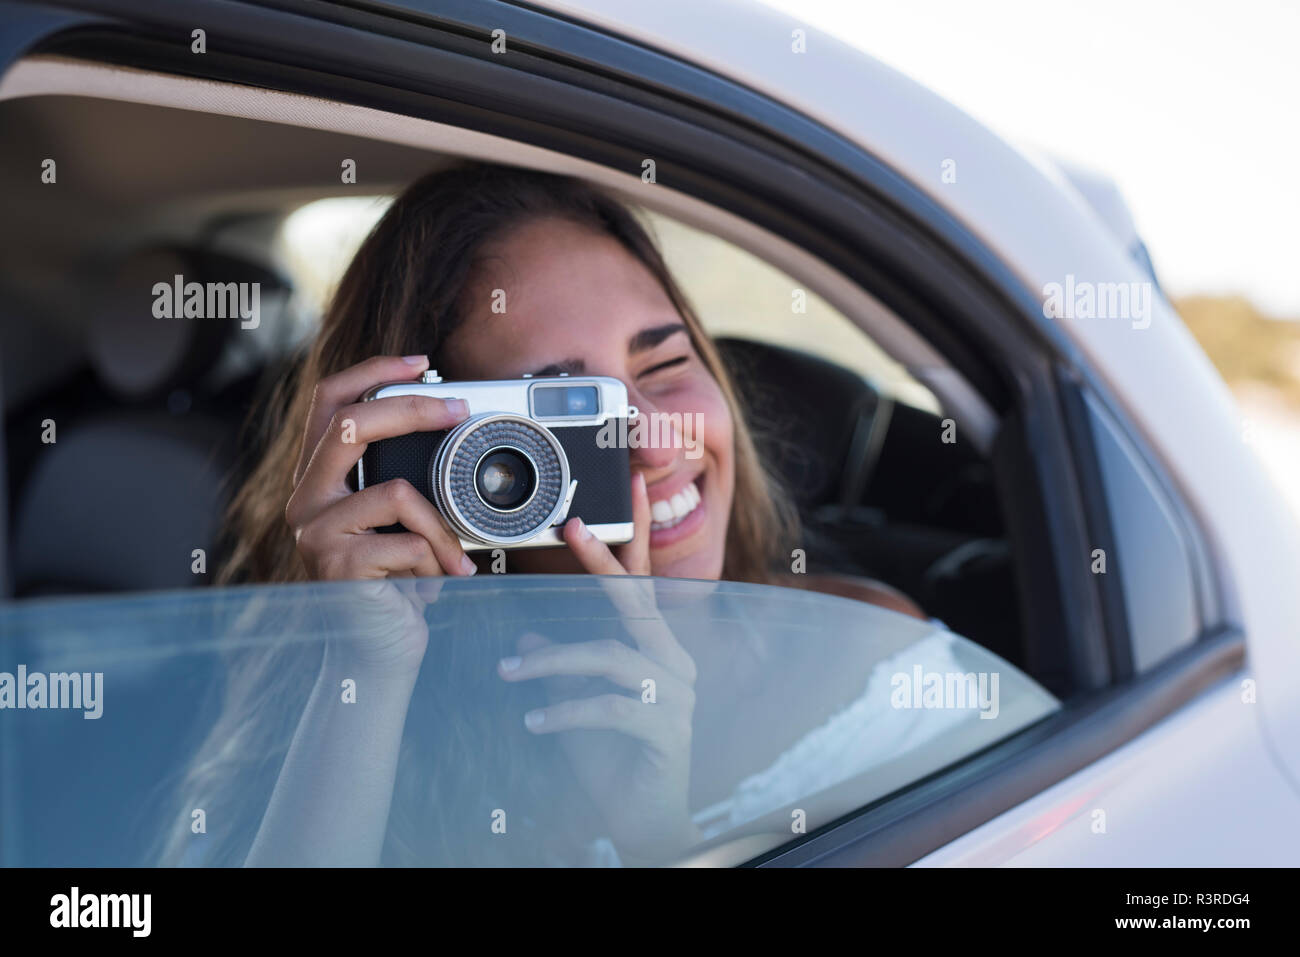 Woman sitting in car, taking pictures with a camera Stock Photo